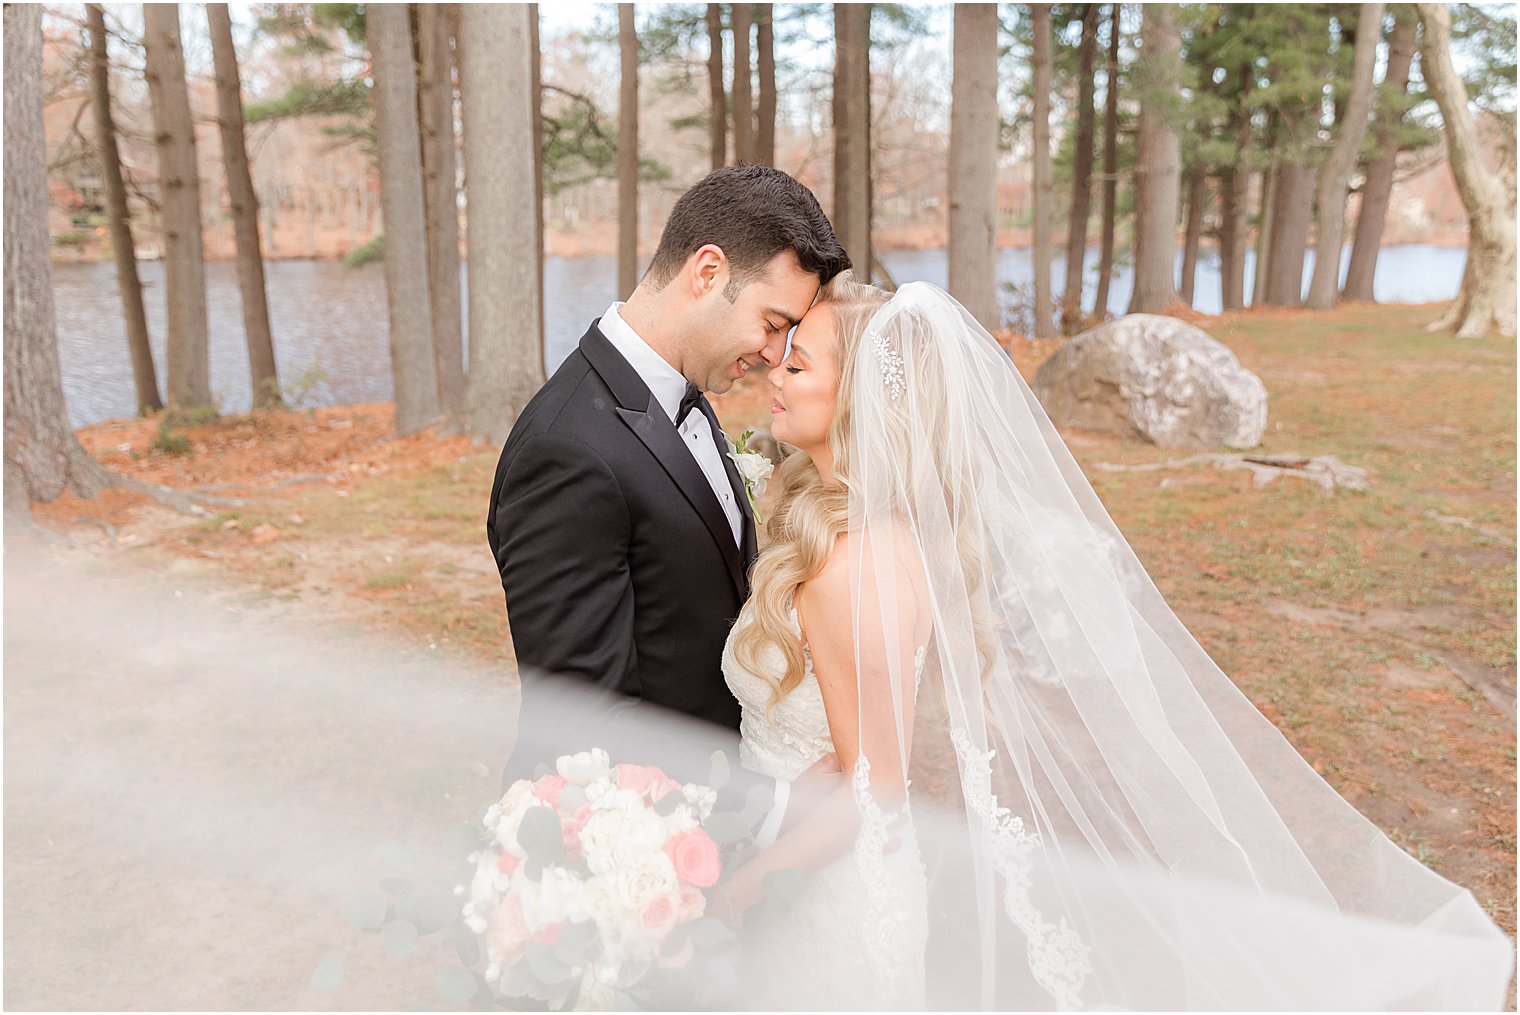 bride and groom touch foreheads together during portraits with bride's veil draped around them